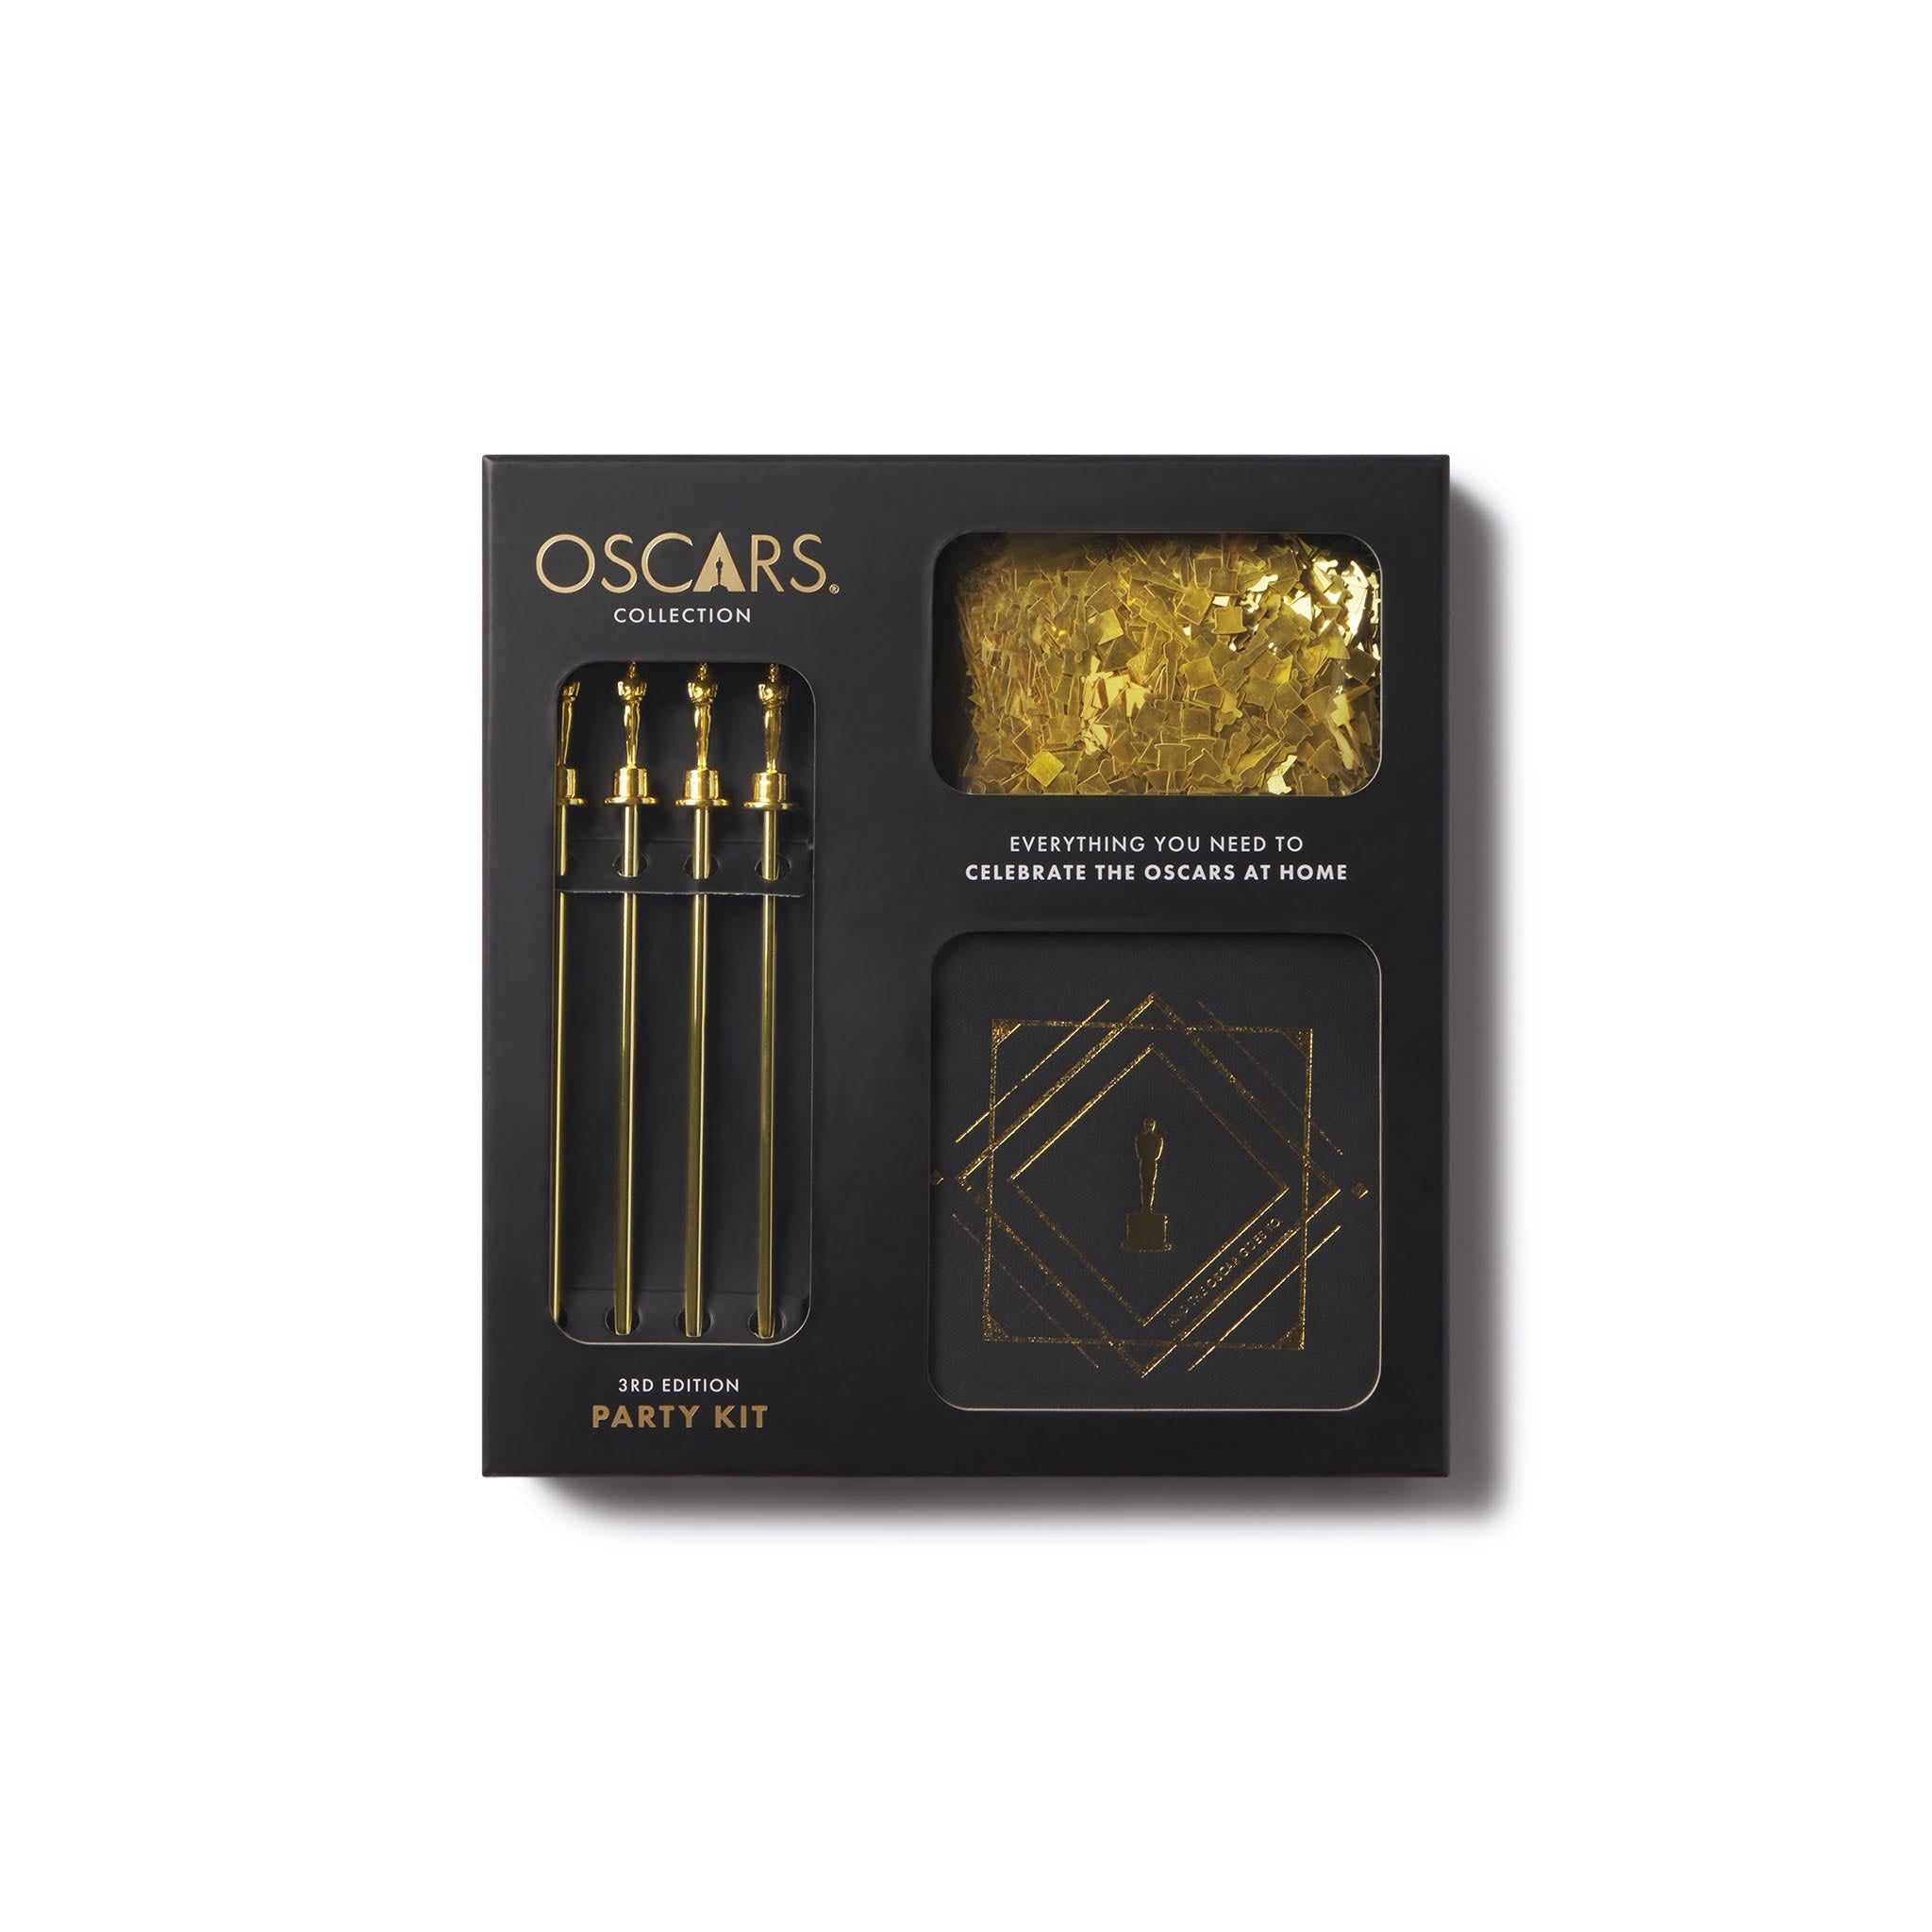 OSCARS® VIEWING PARTY KIT - 3RD EDITION